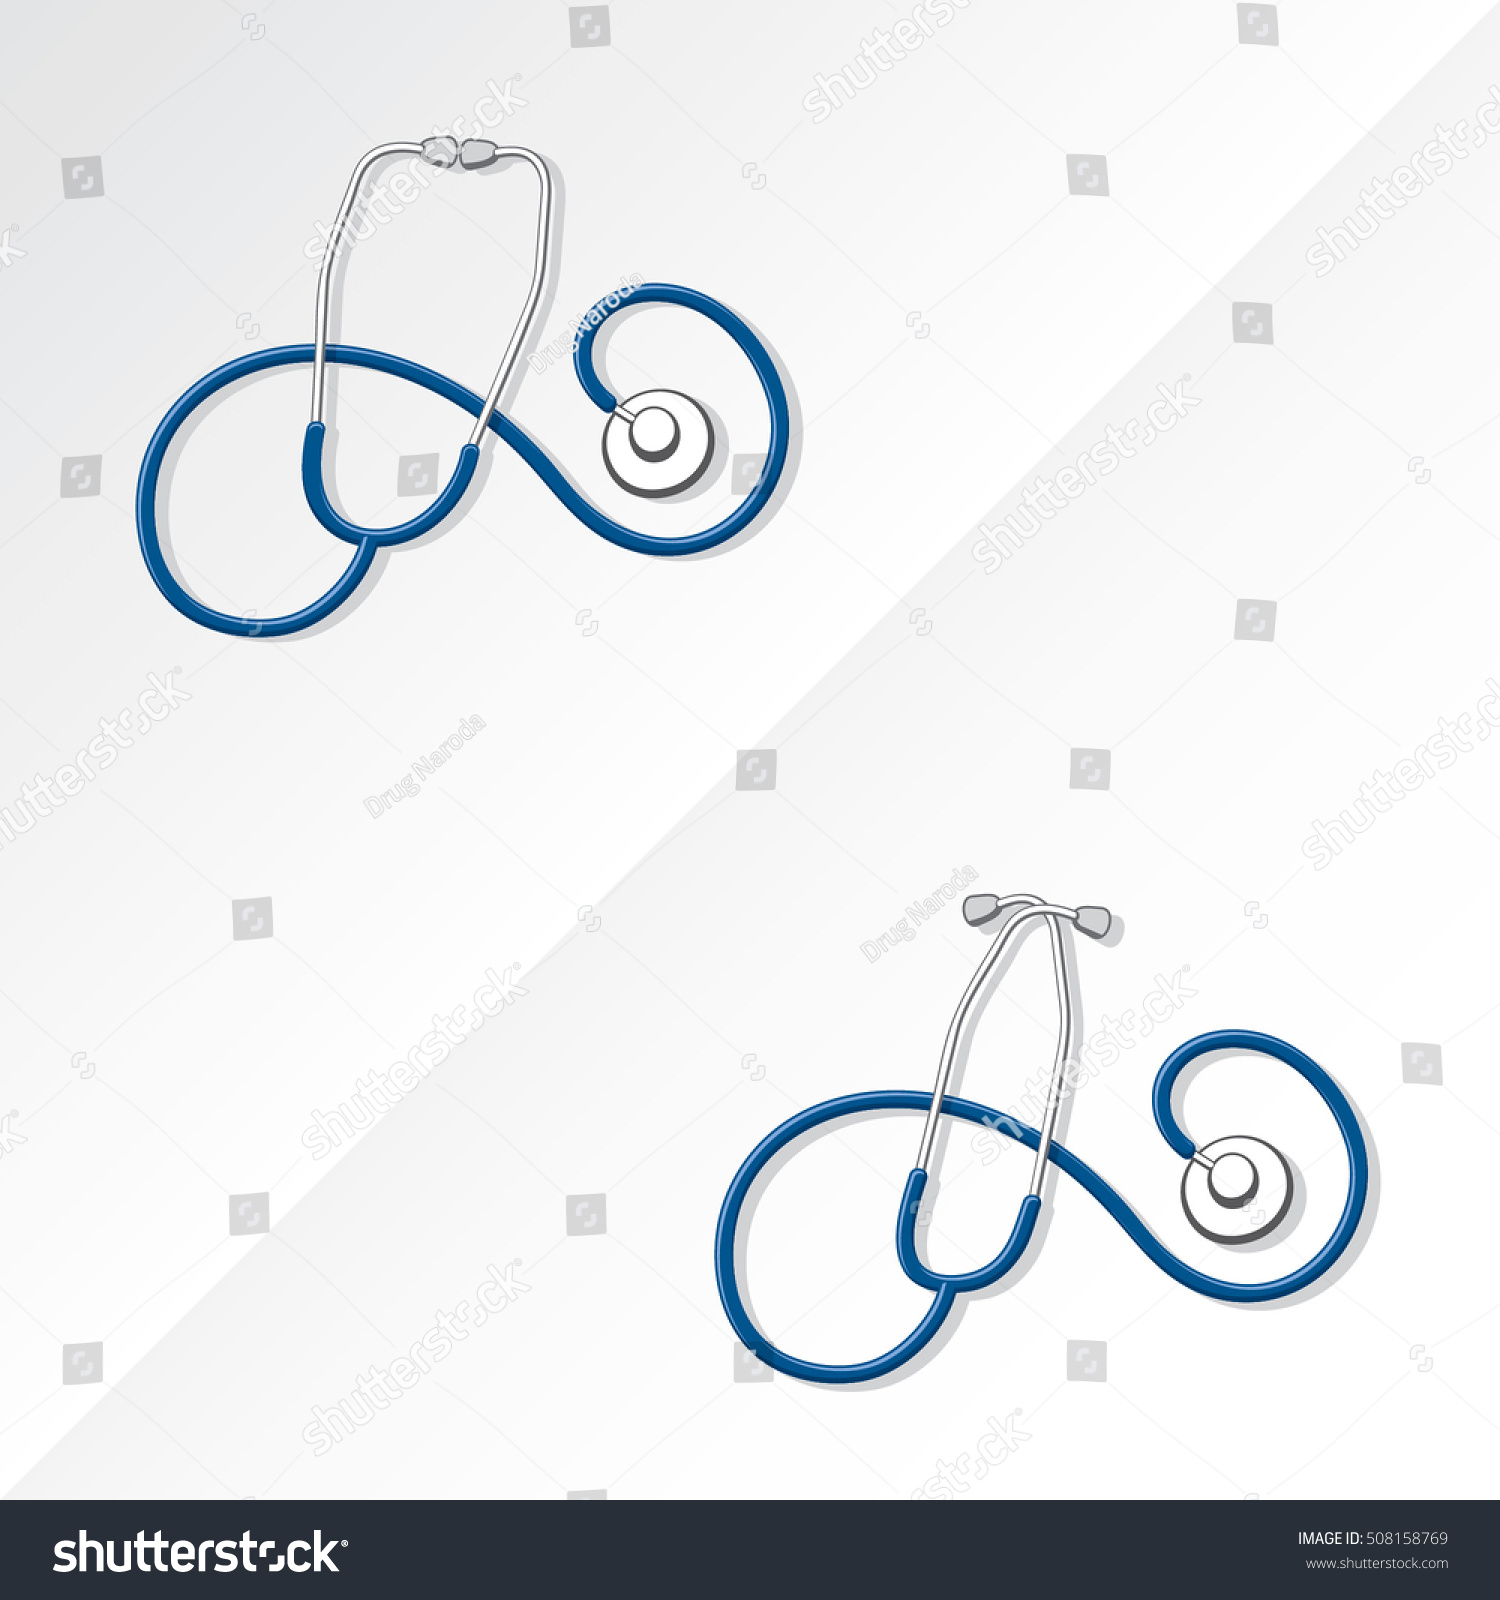 SVG of Two Medical Stethoscopes with Spiral Shape Tubing Icons Set One with Crossed Binaural Another with Eartips Put Together - Blue and Grayscale Objects on White Background - Realistic Flat Design svg